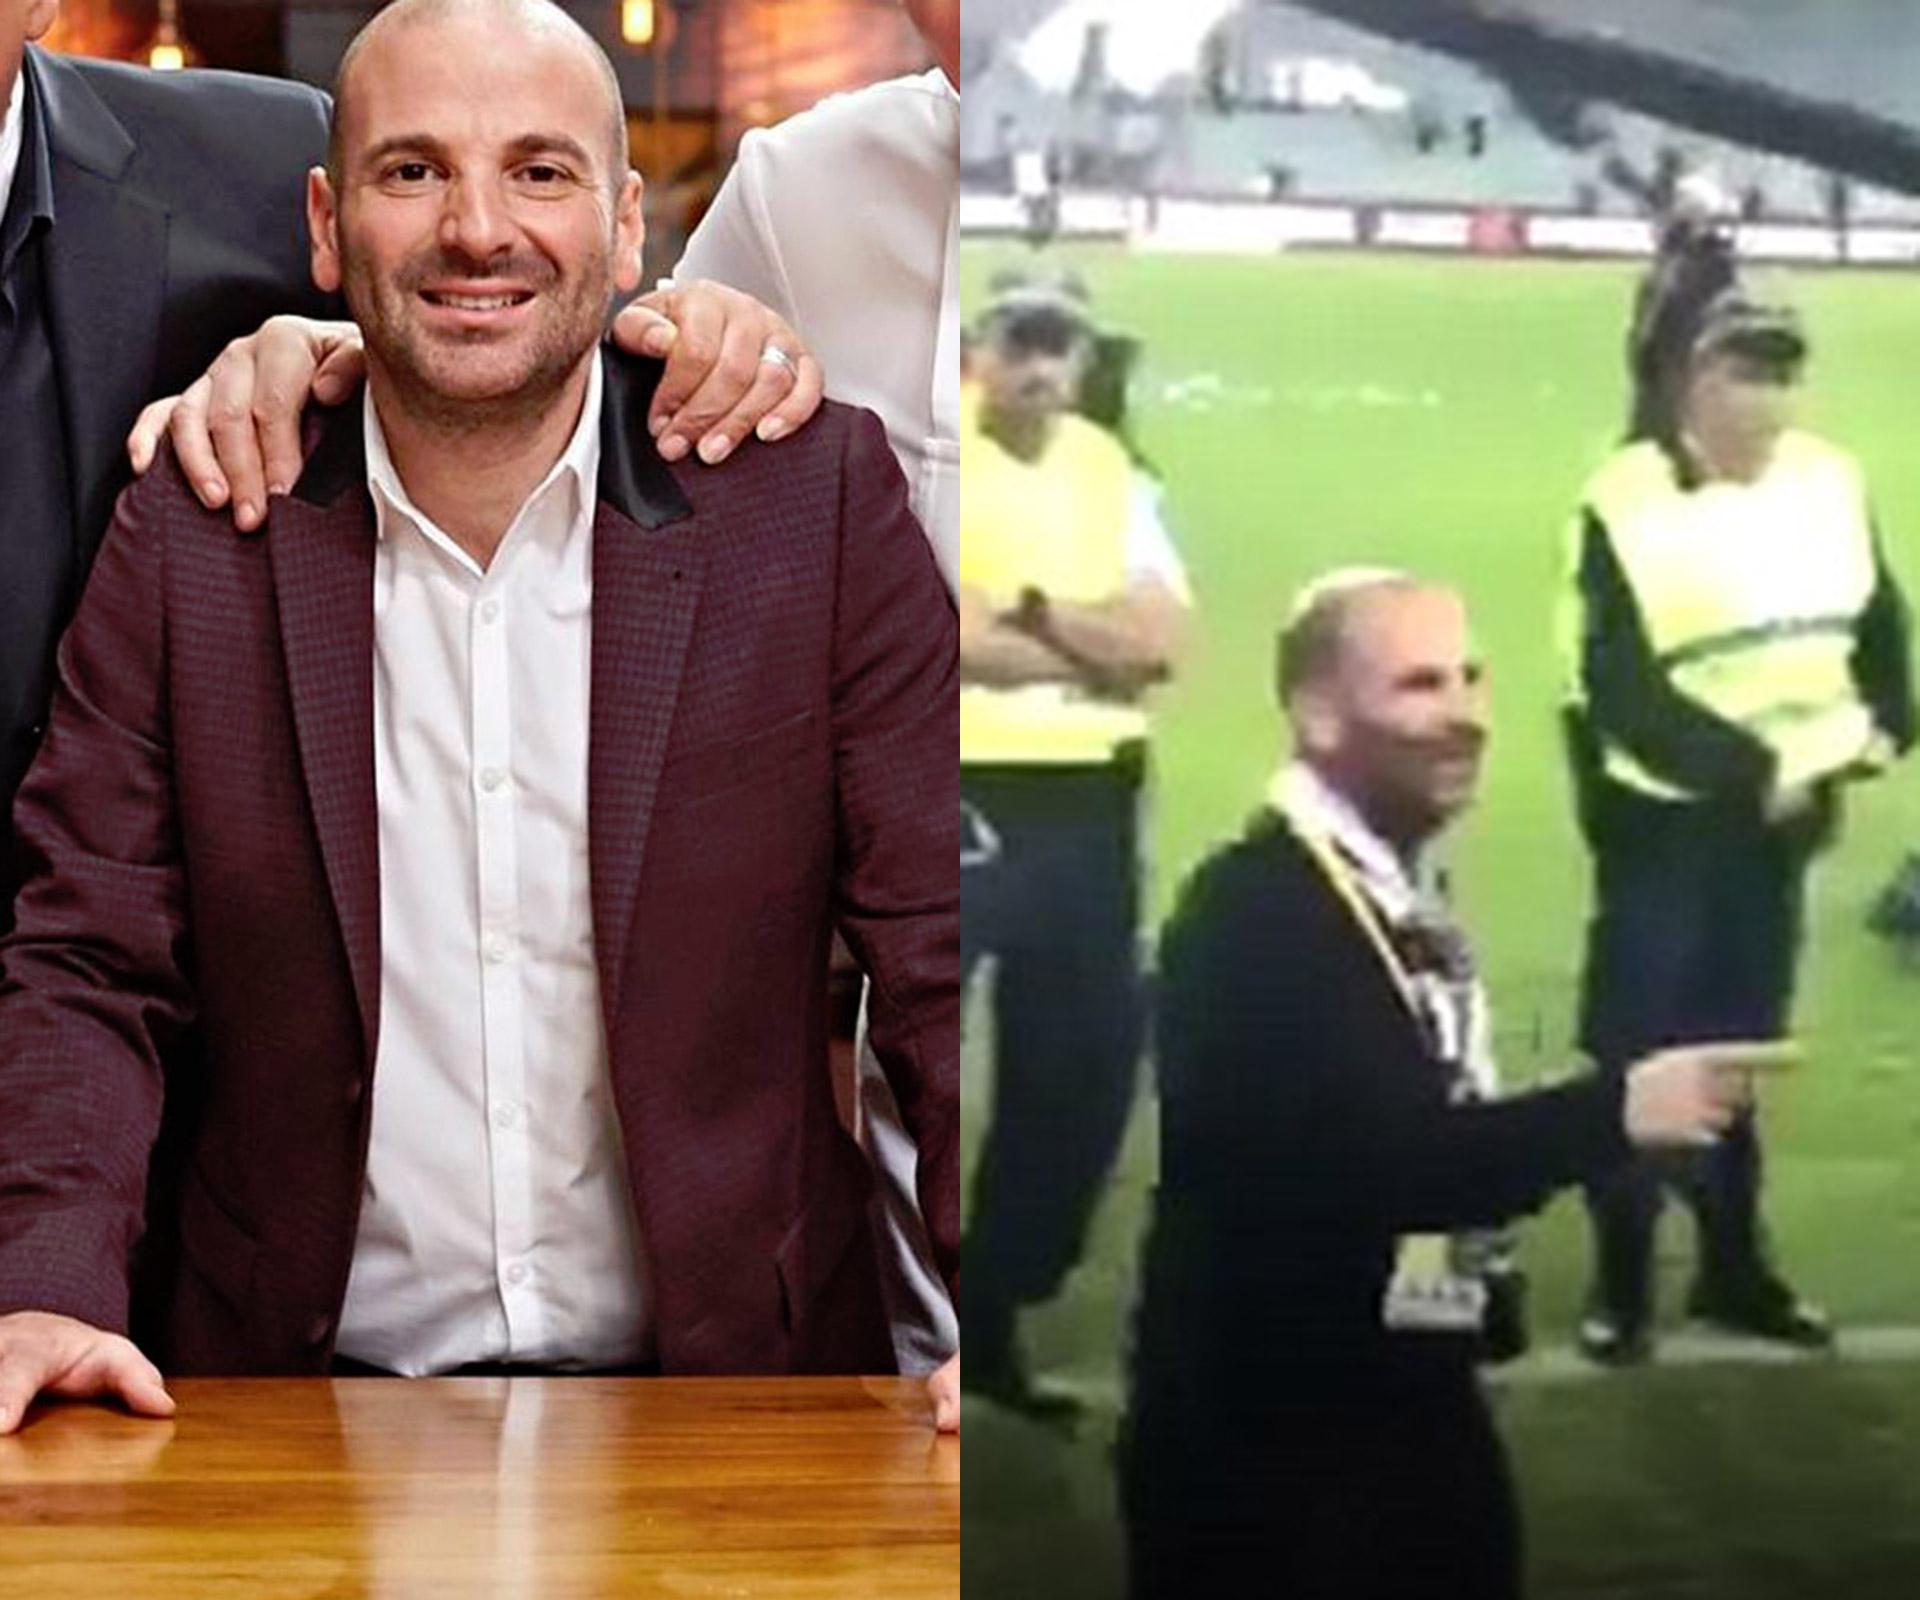 MasterChef’s George Calombaris charged with assault after being filmed shoving man